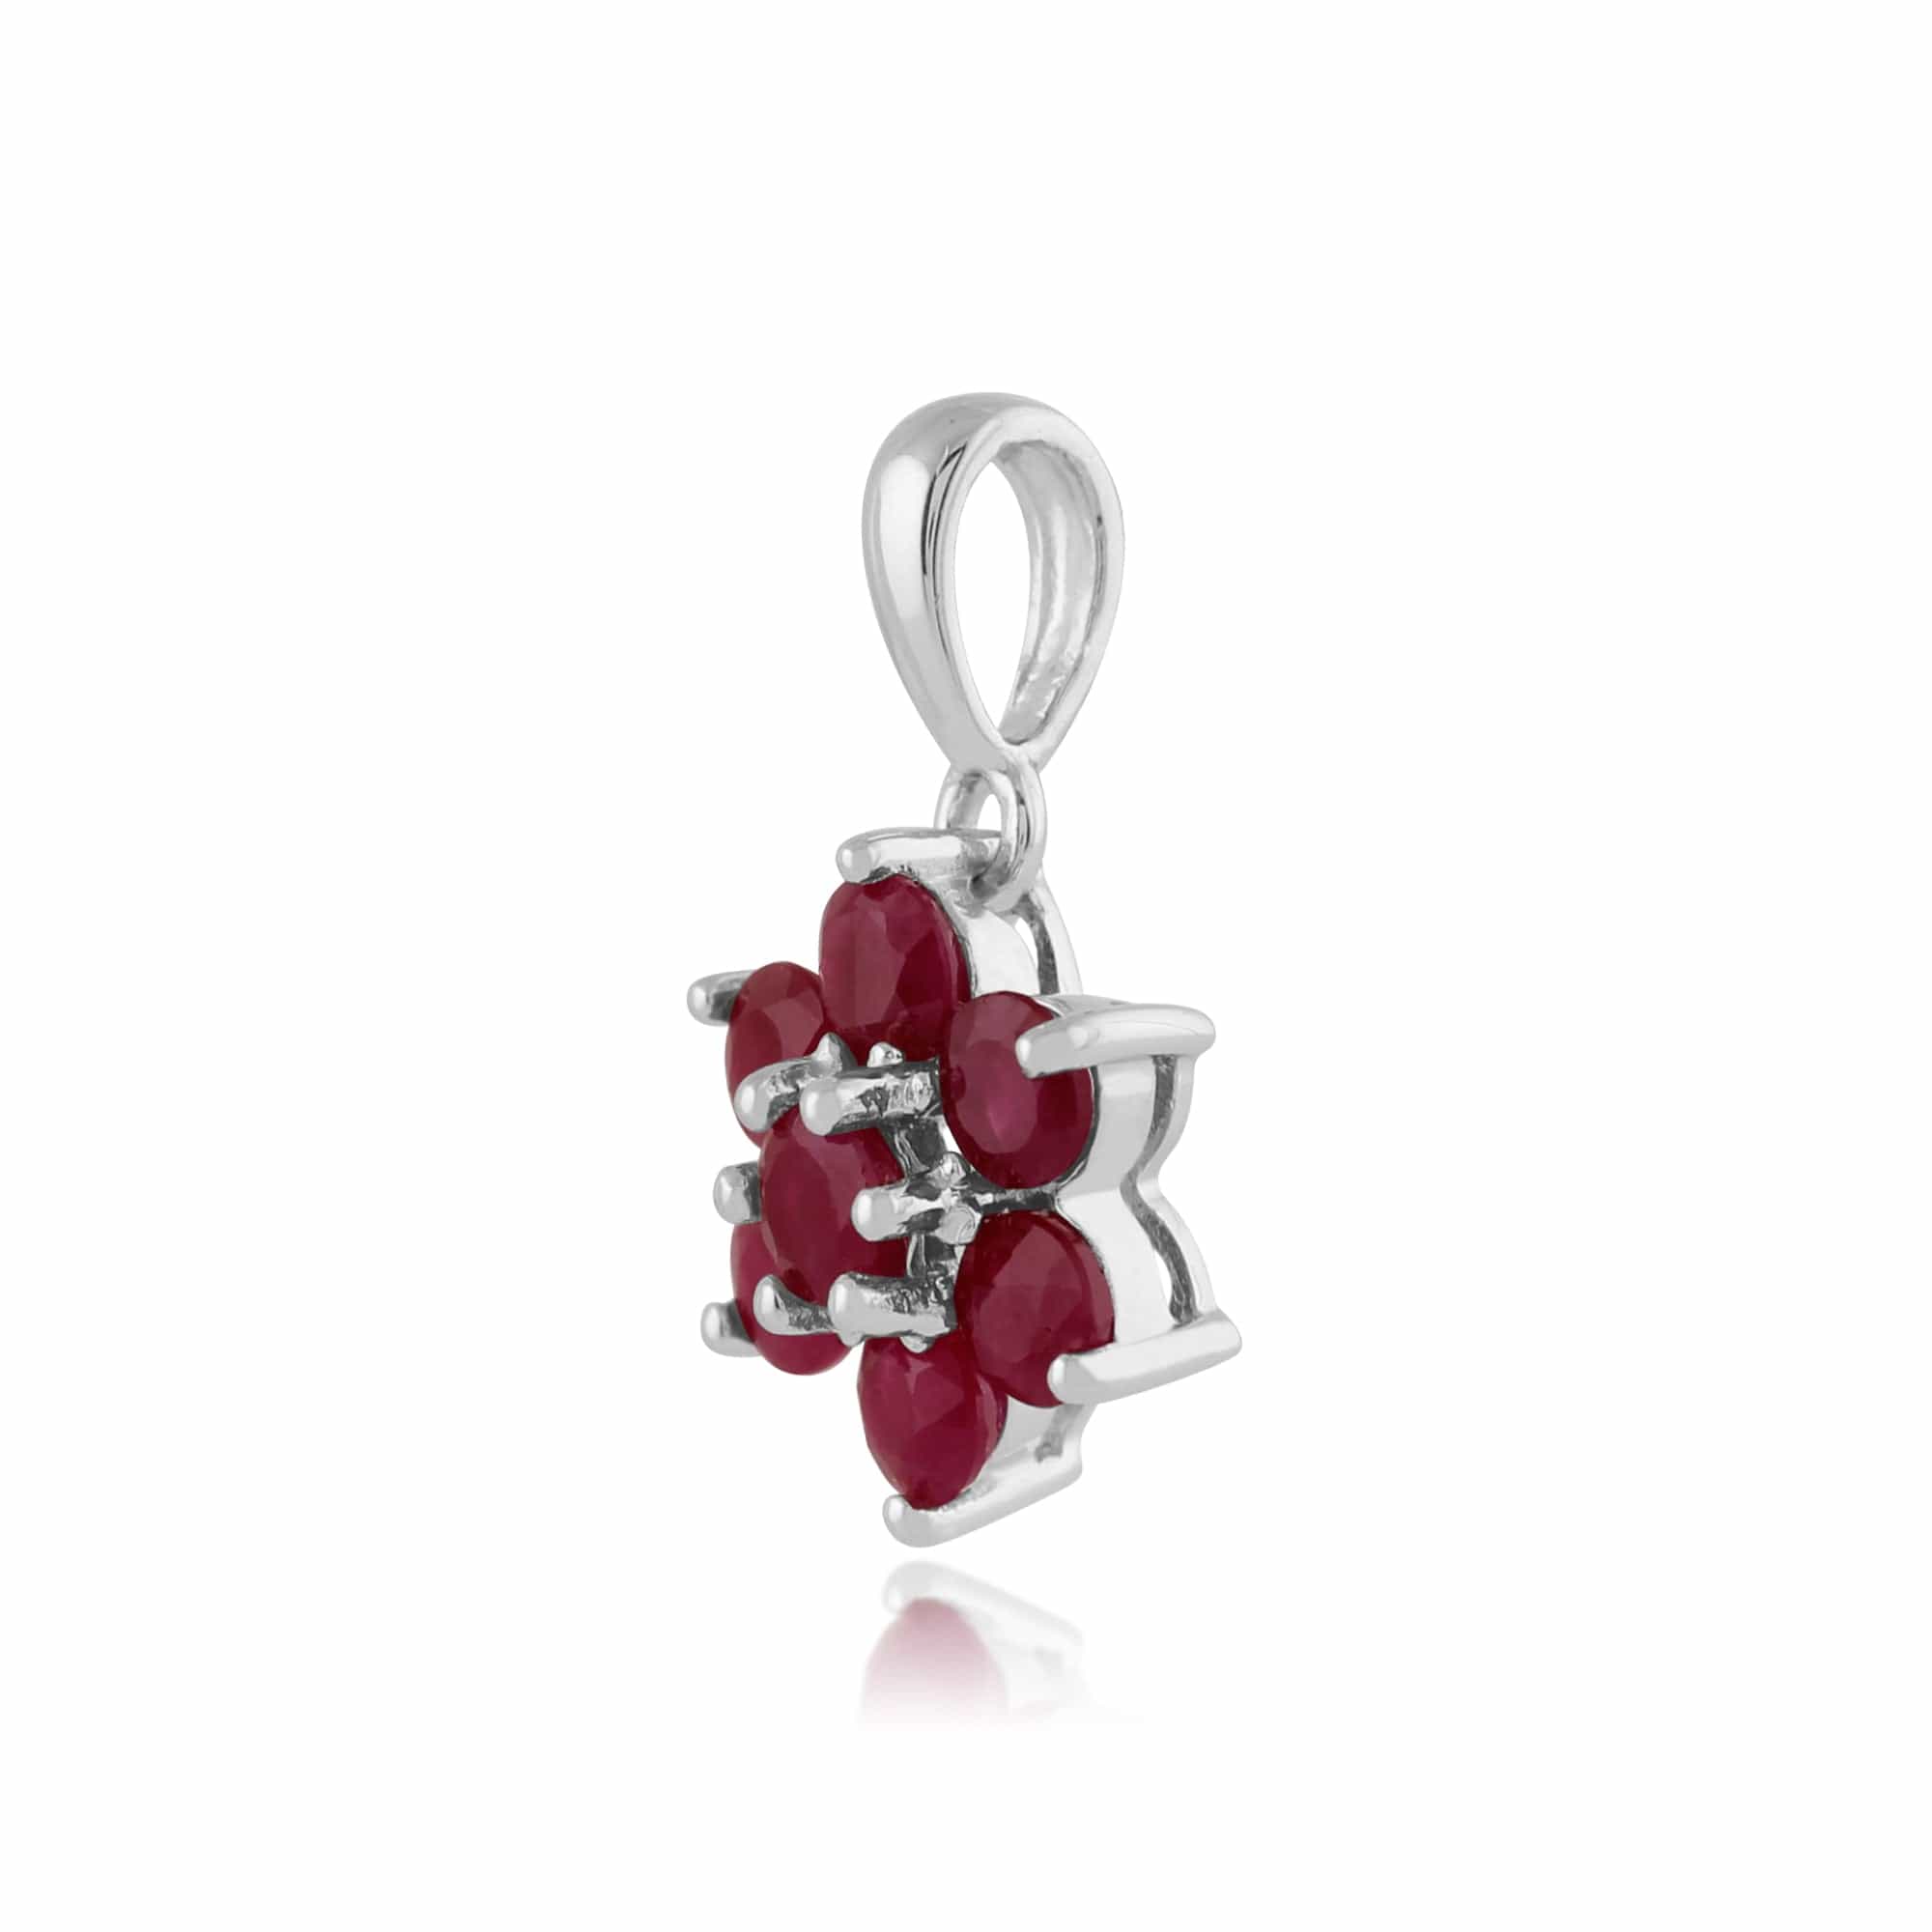 270E014008925-270P0169079 Floral Round Ruby Flower Cluster Stud Earrings & Pendant Set in 925 Sterling Silver 5